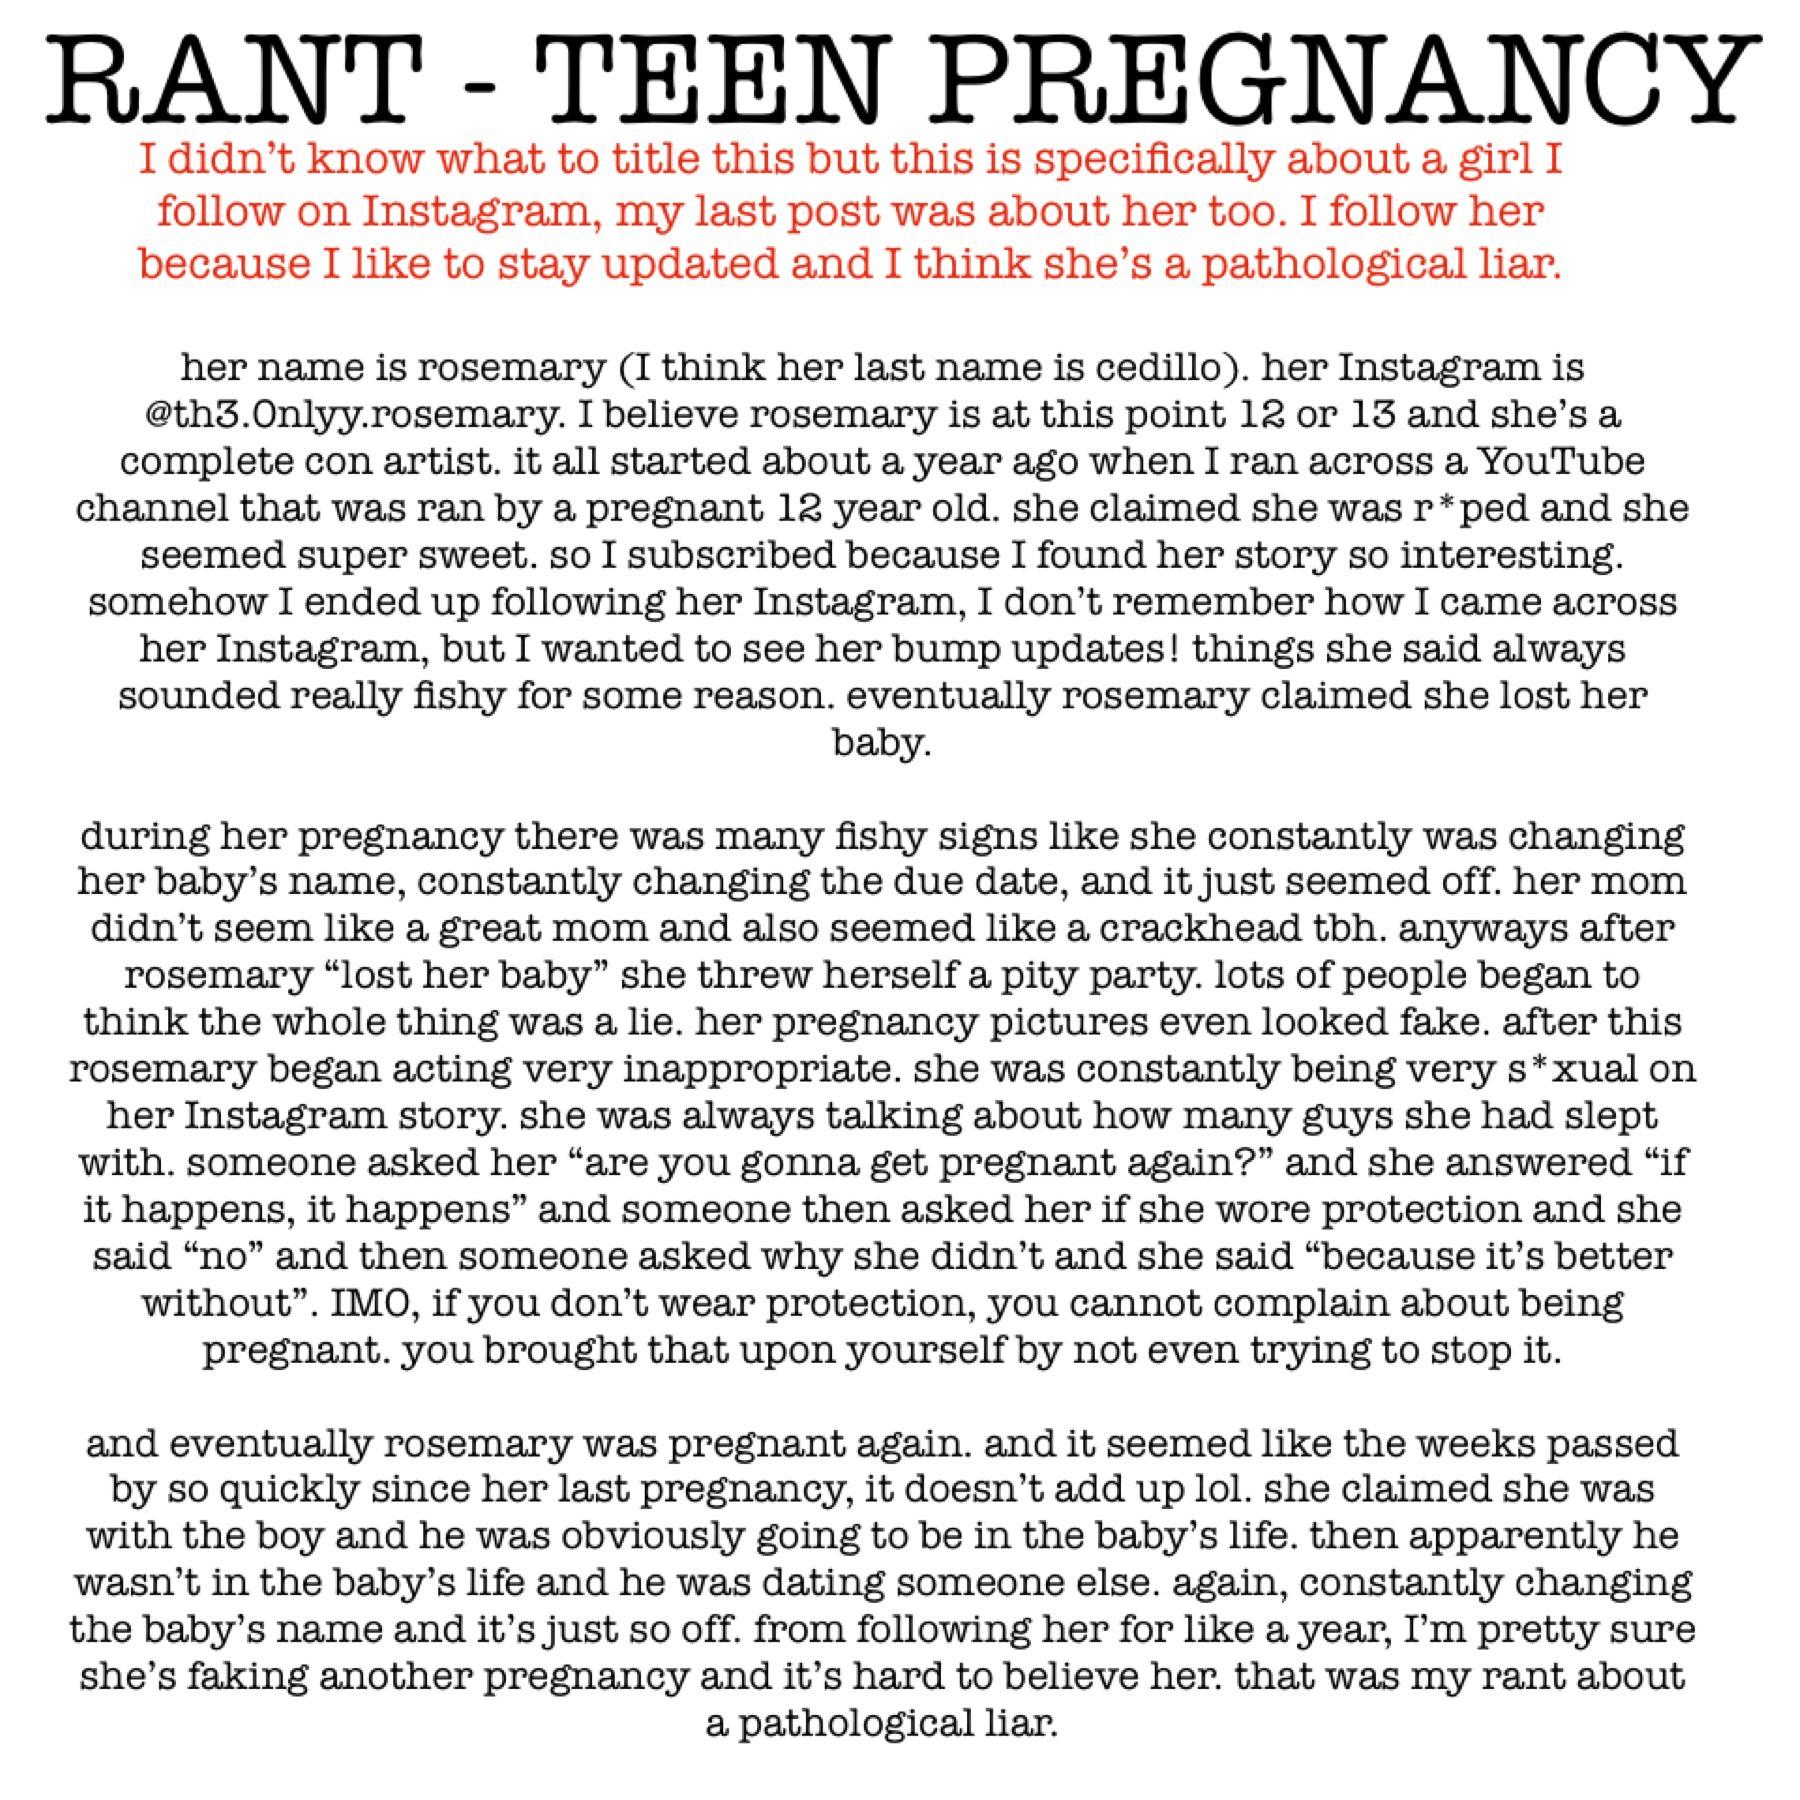 a rant about a 12 or 13 year old pathological liar/a young child who needs a good role model 